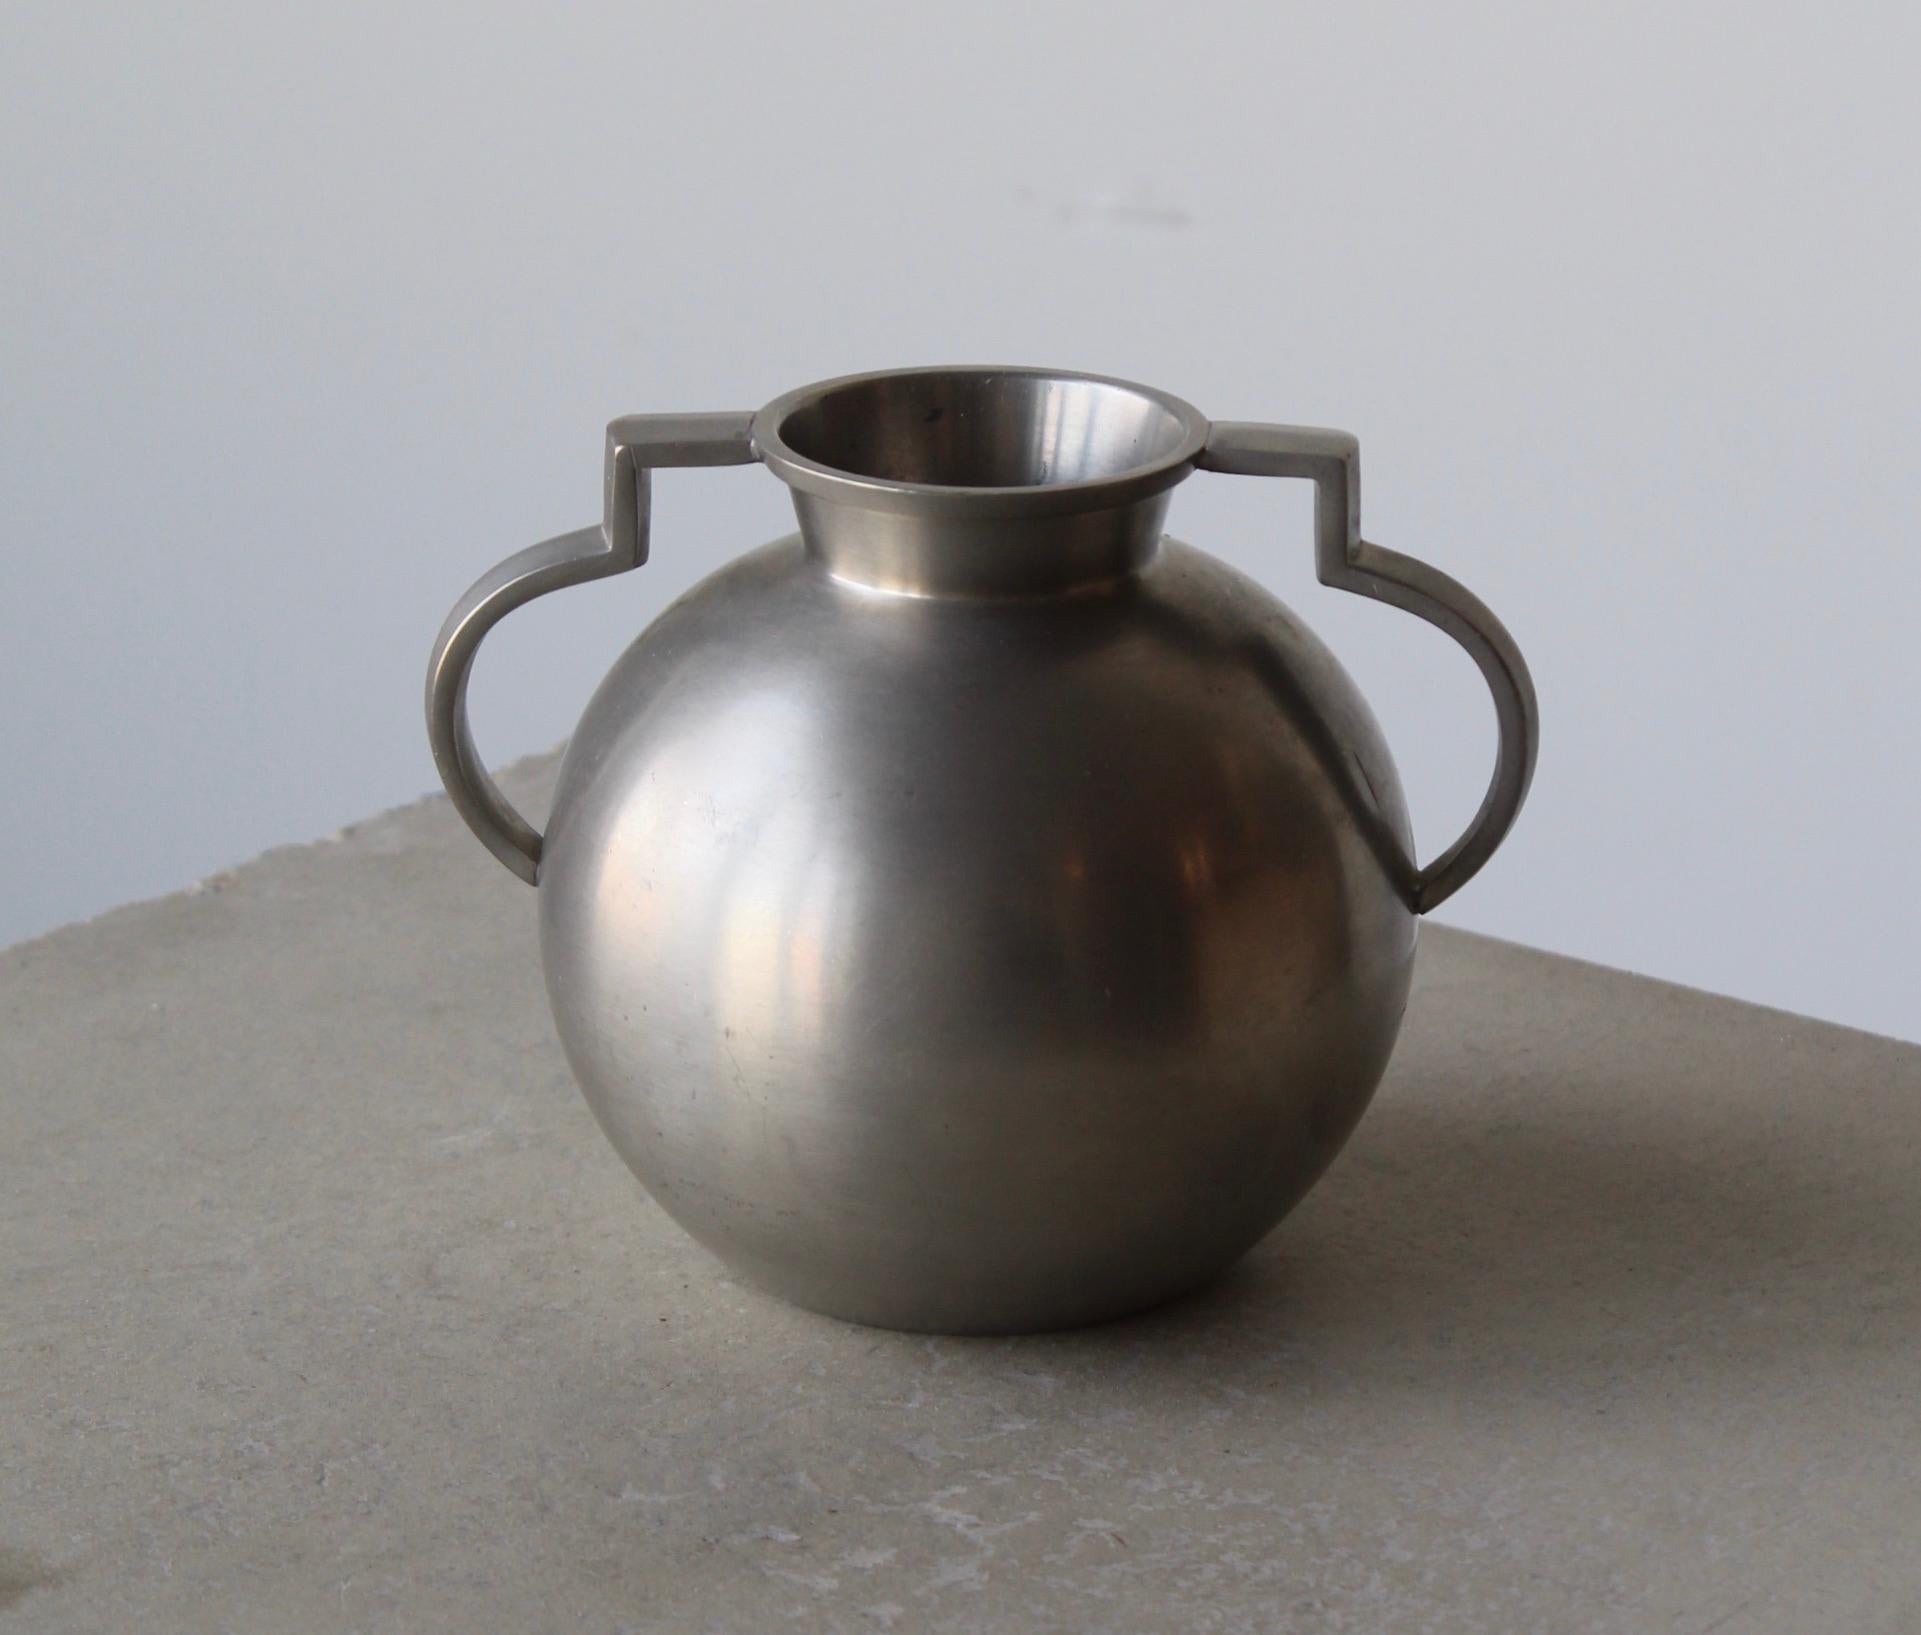 A vase or vessel or trophy, produced by GAB, stamped with makers mark, Sweden. In cast pewter.

Other designers of the period include Josef Frank, Kaare Klint, Estrid Ericson, and Just Andersen.
   